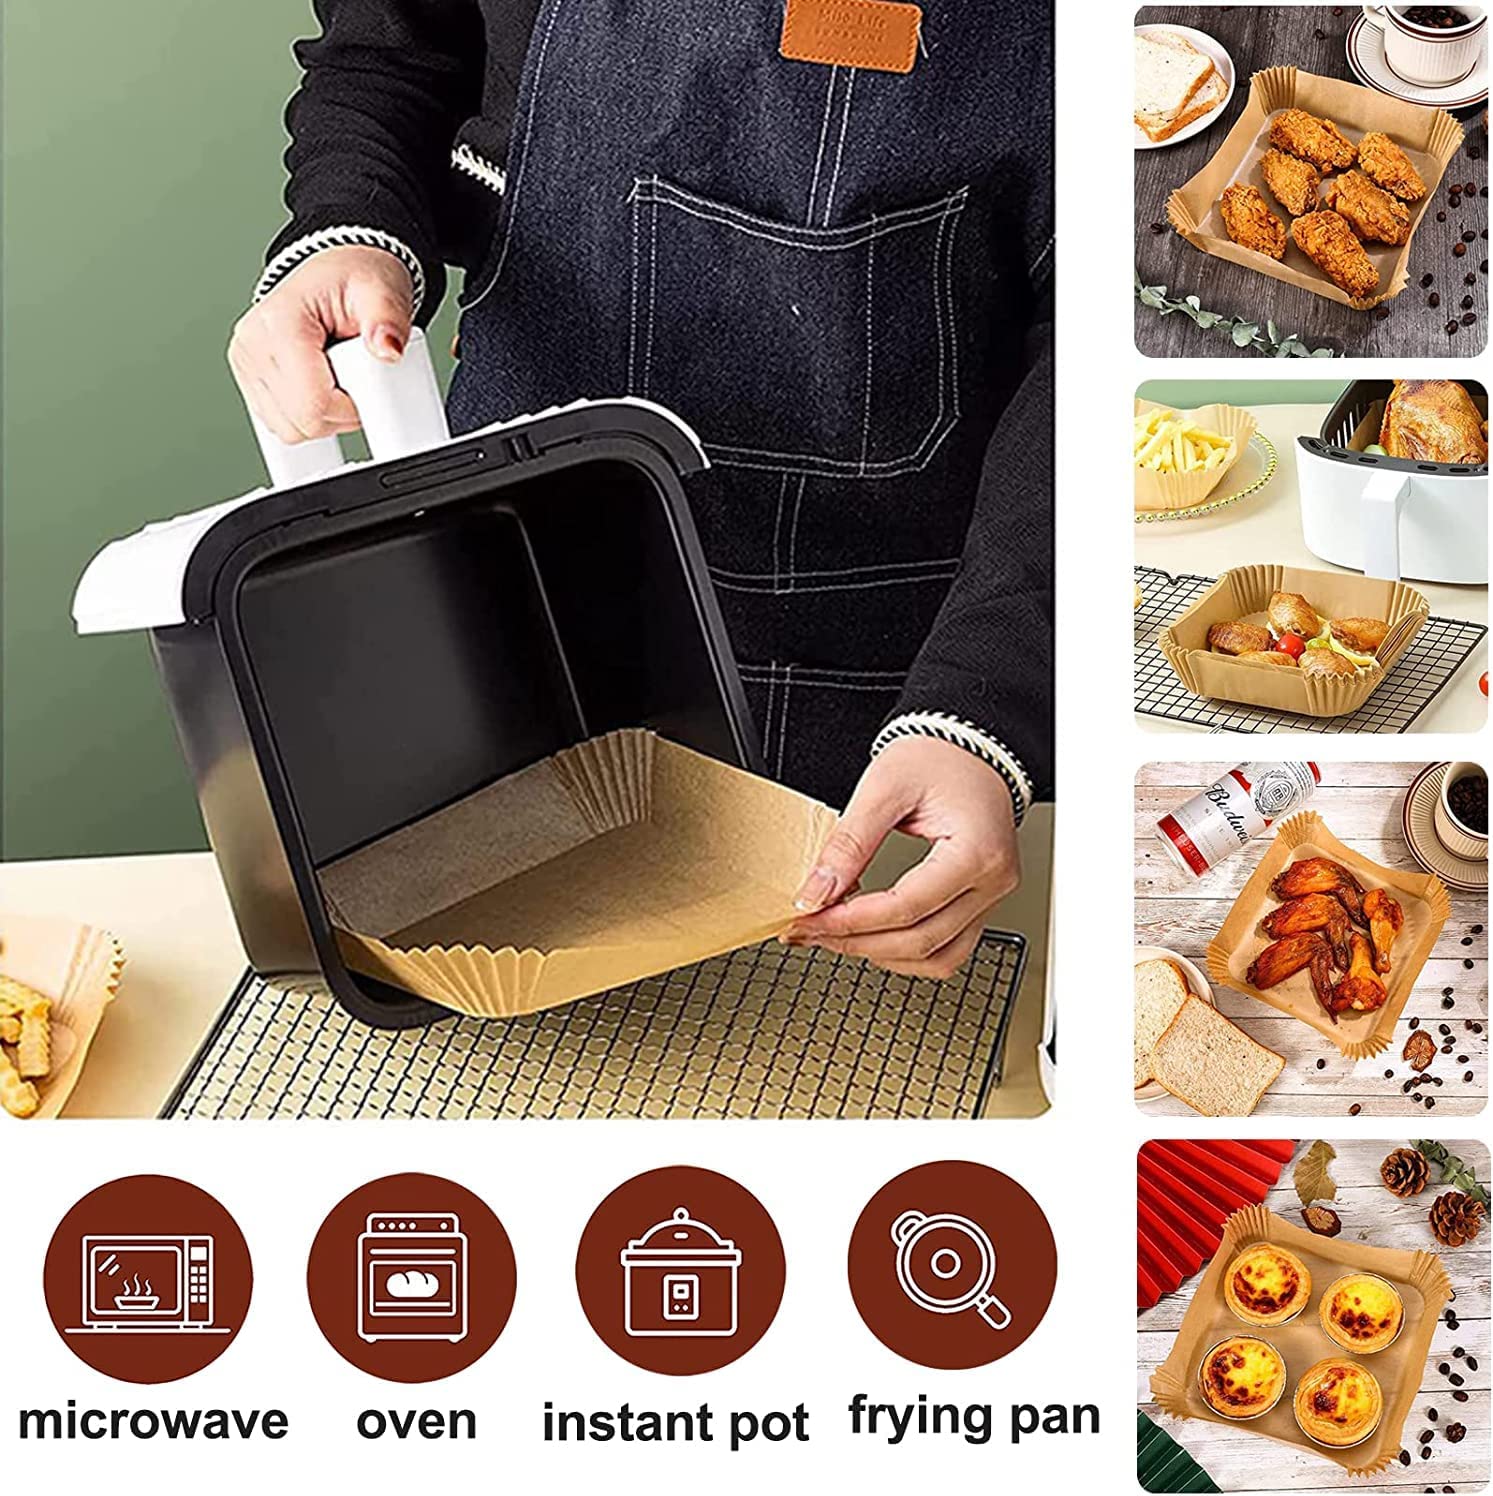 M BUDER Non-stick and Water Proof Parchment Paper - 125 Pcs Air Fryer Disposable Paper Liner for Frying, Baking, Cooking, Roasting - Oil-proof, 6.3-inch - image 3 of 5